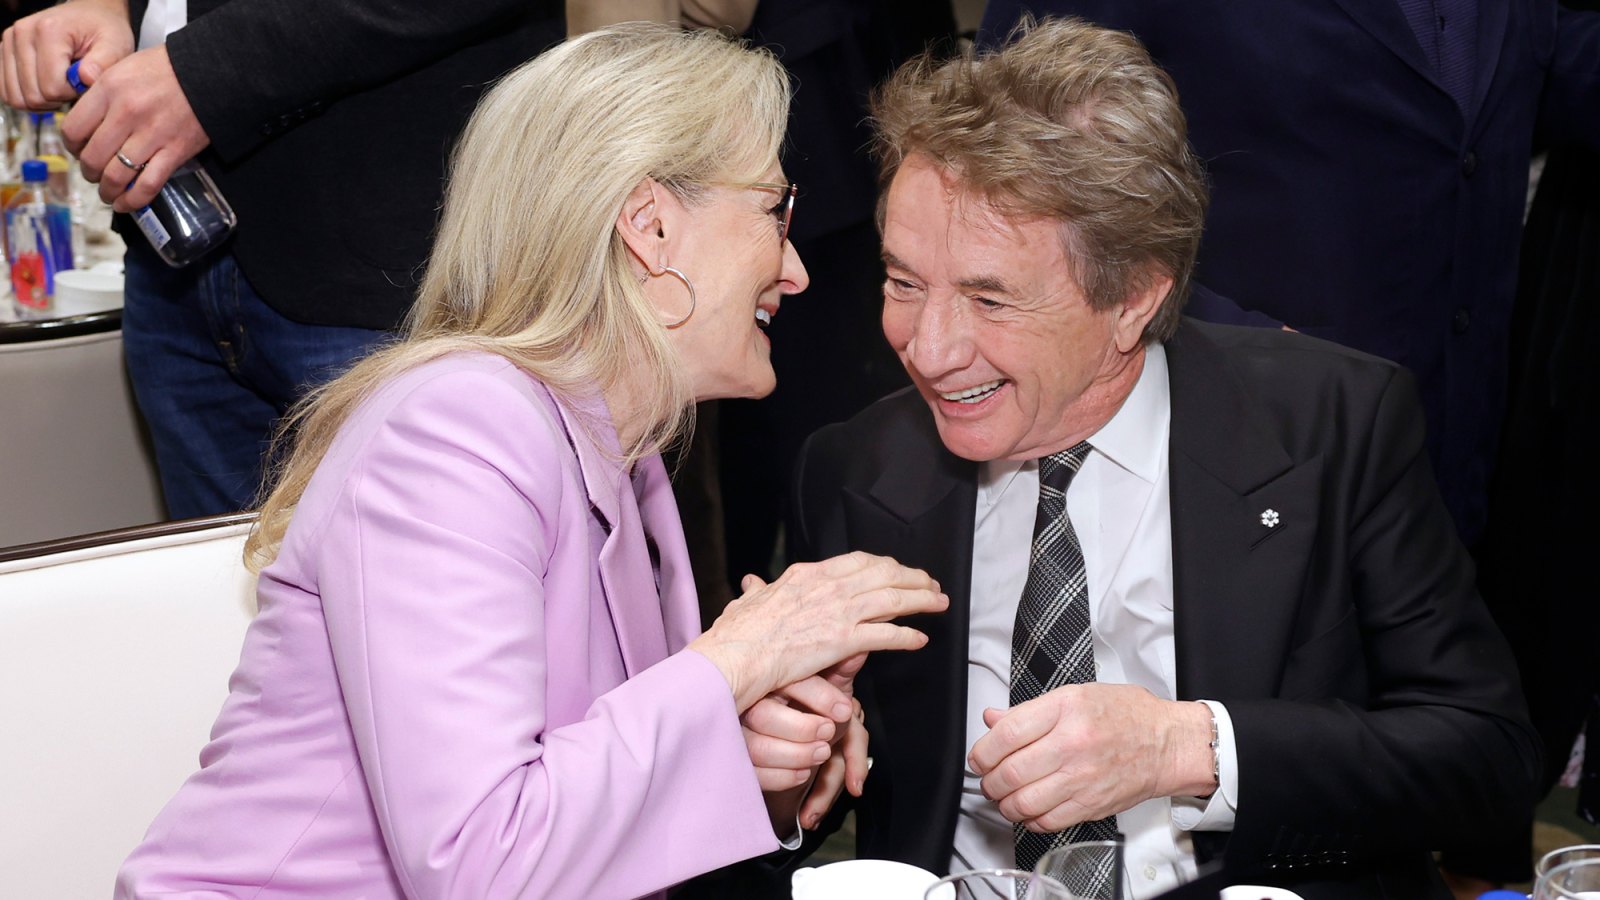 Meryl Streep and Martin Short See ‘Merrily We Roll Along’ on Broadway After Denying Romance Rumors